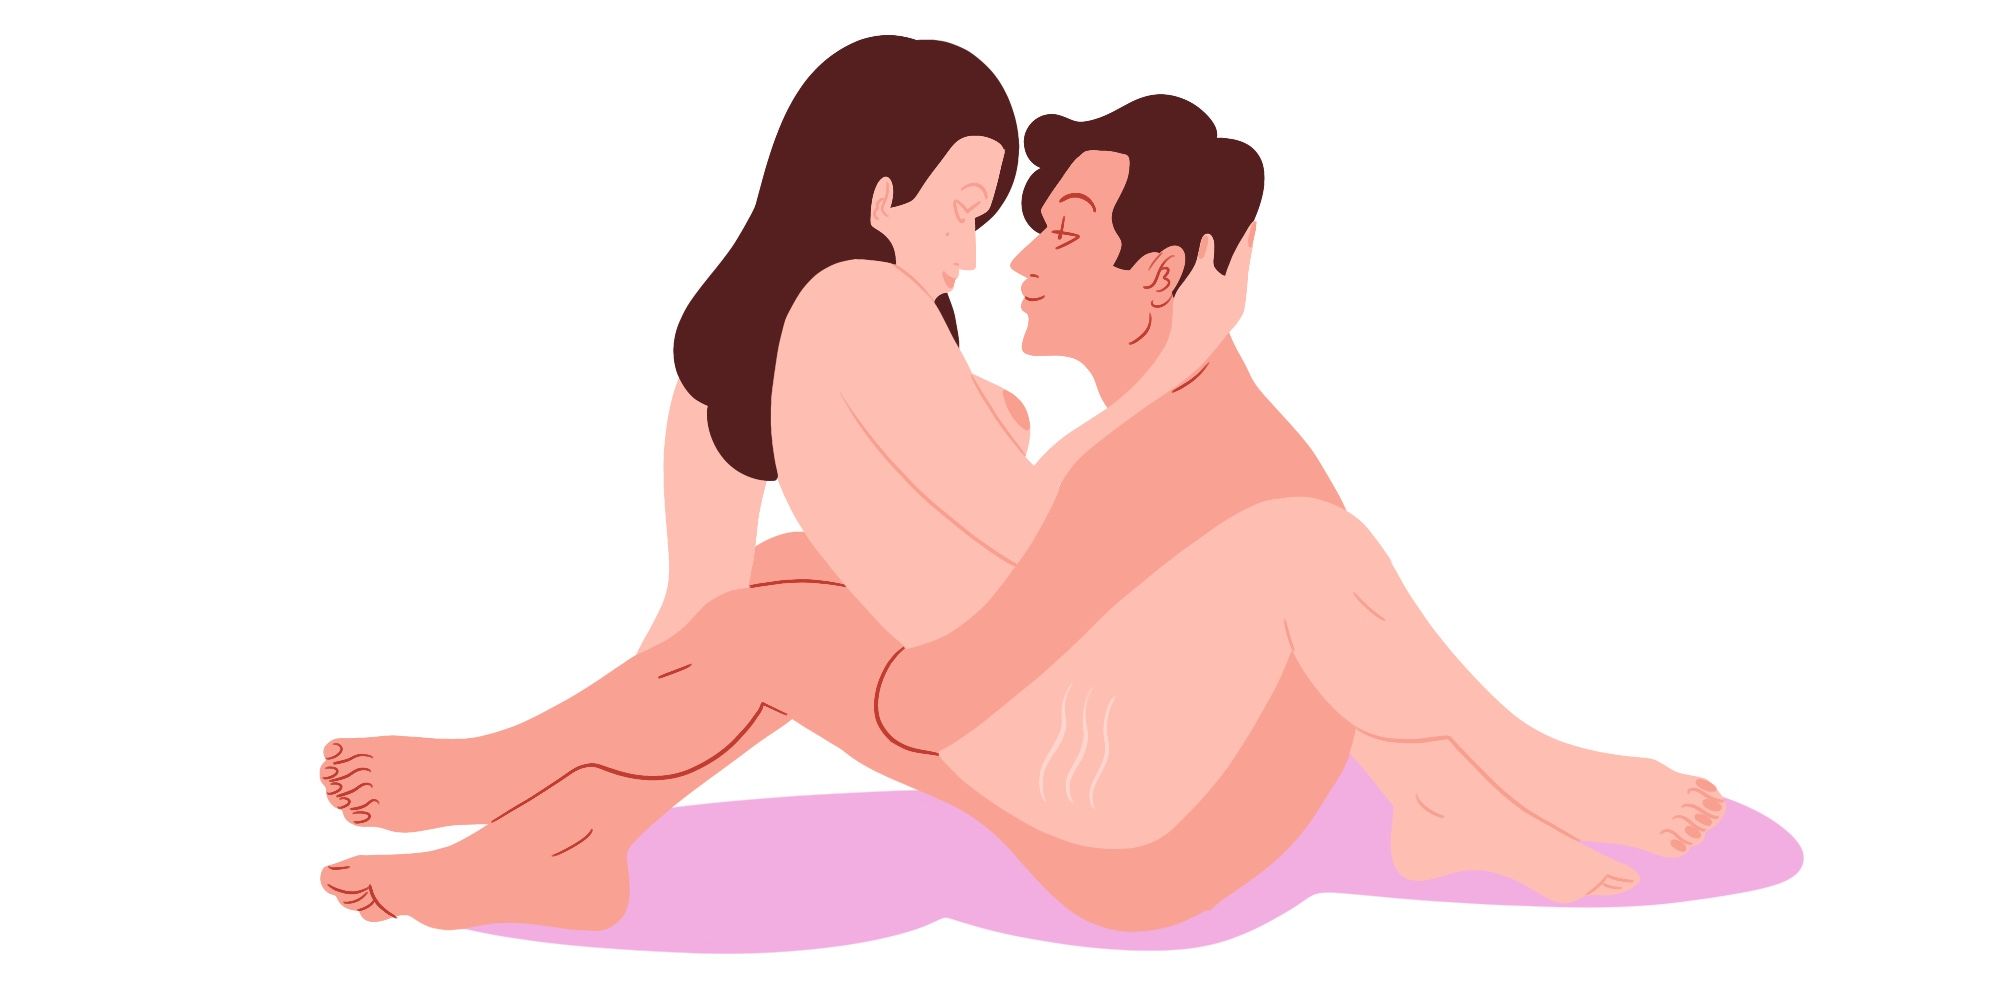 couple help life married position sex